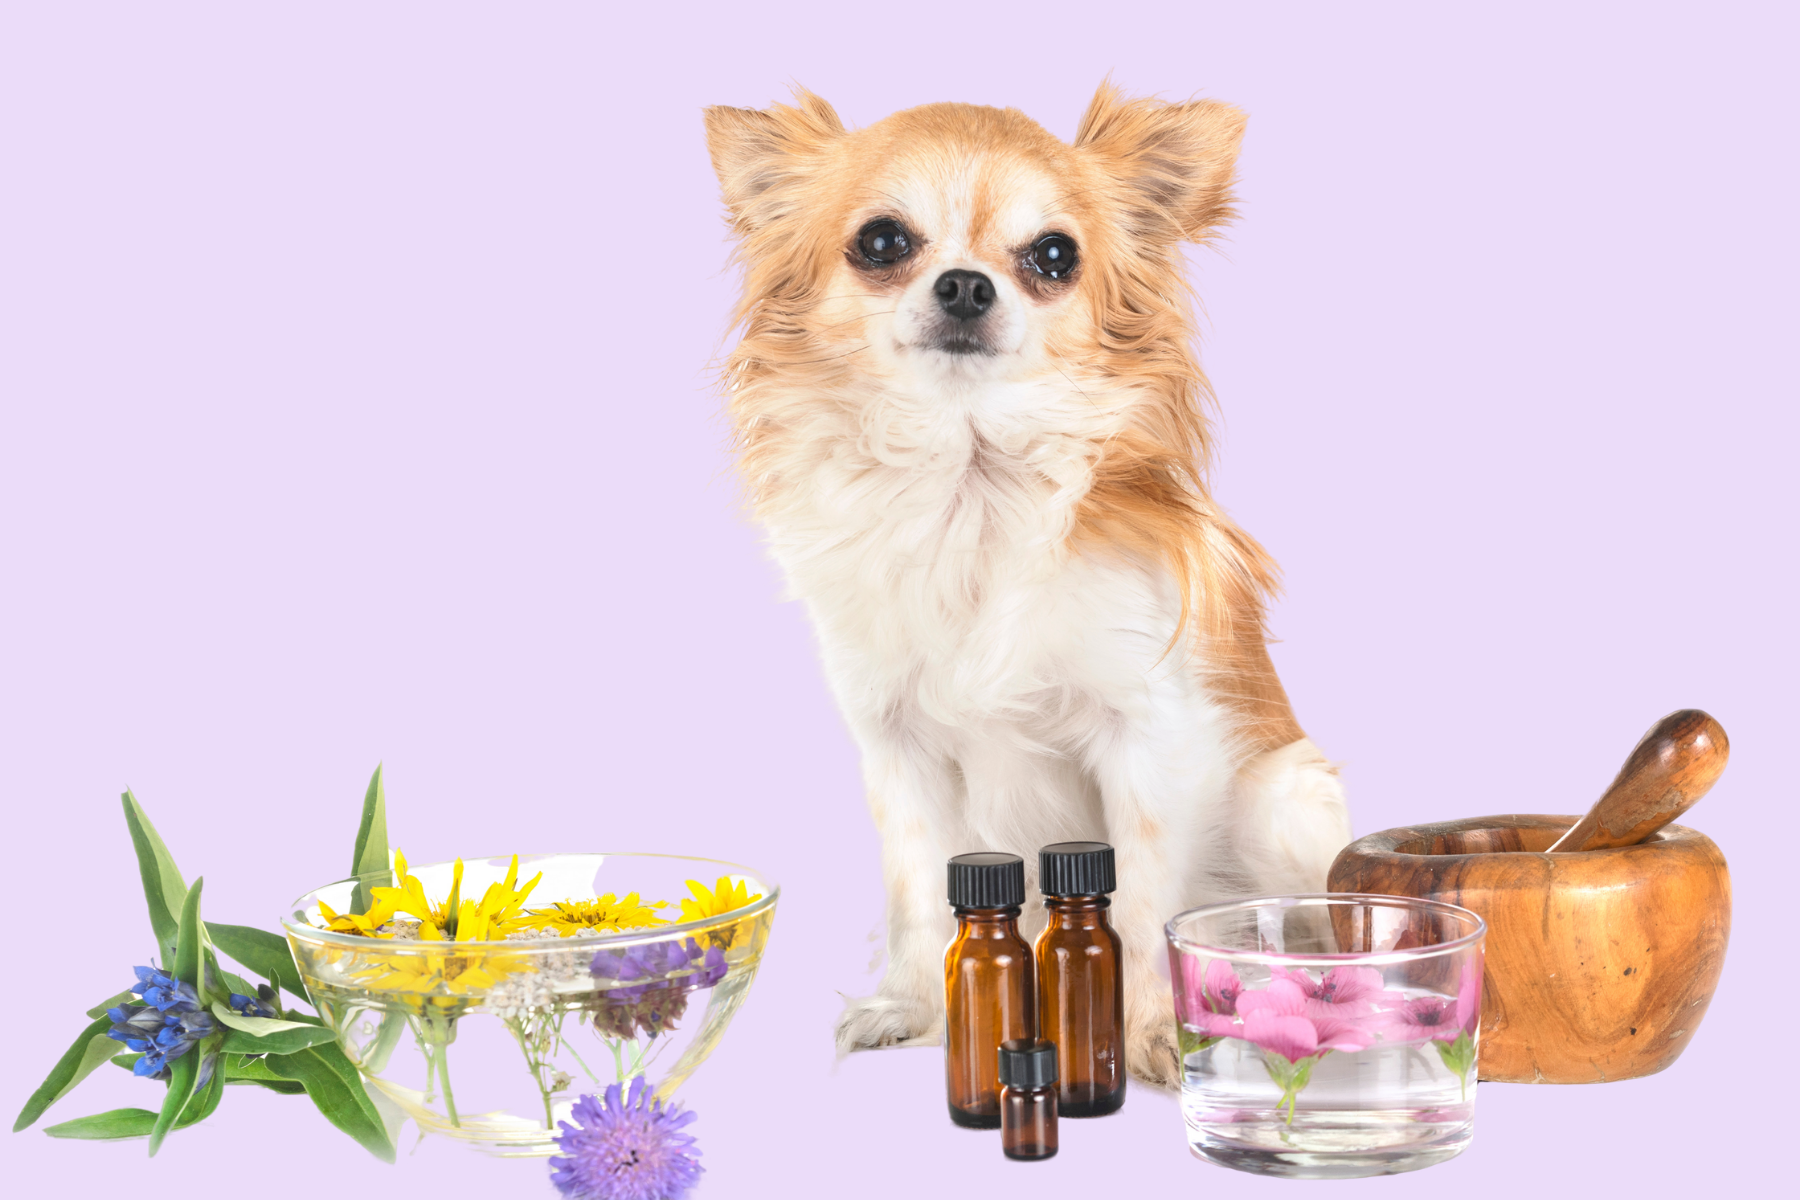 Do Essential Oils Work On Pets? Are They Safe?